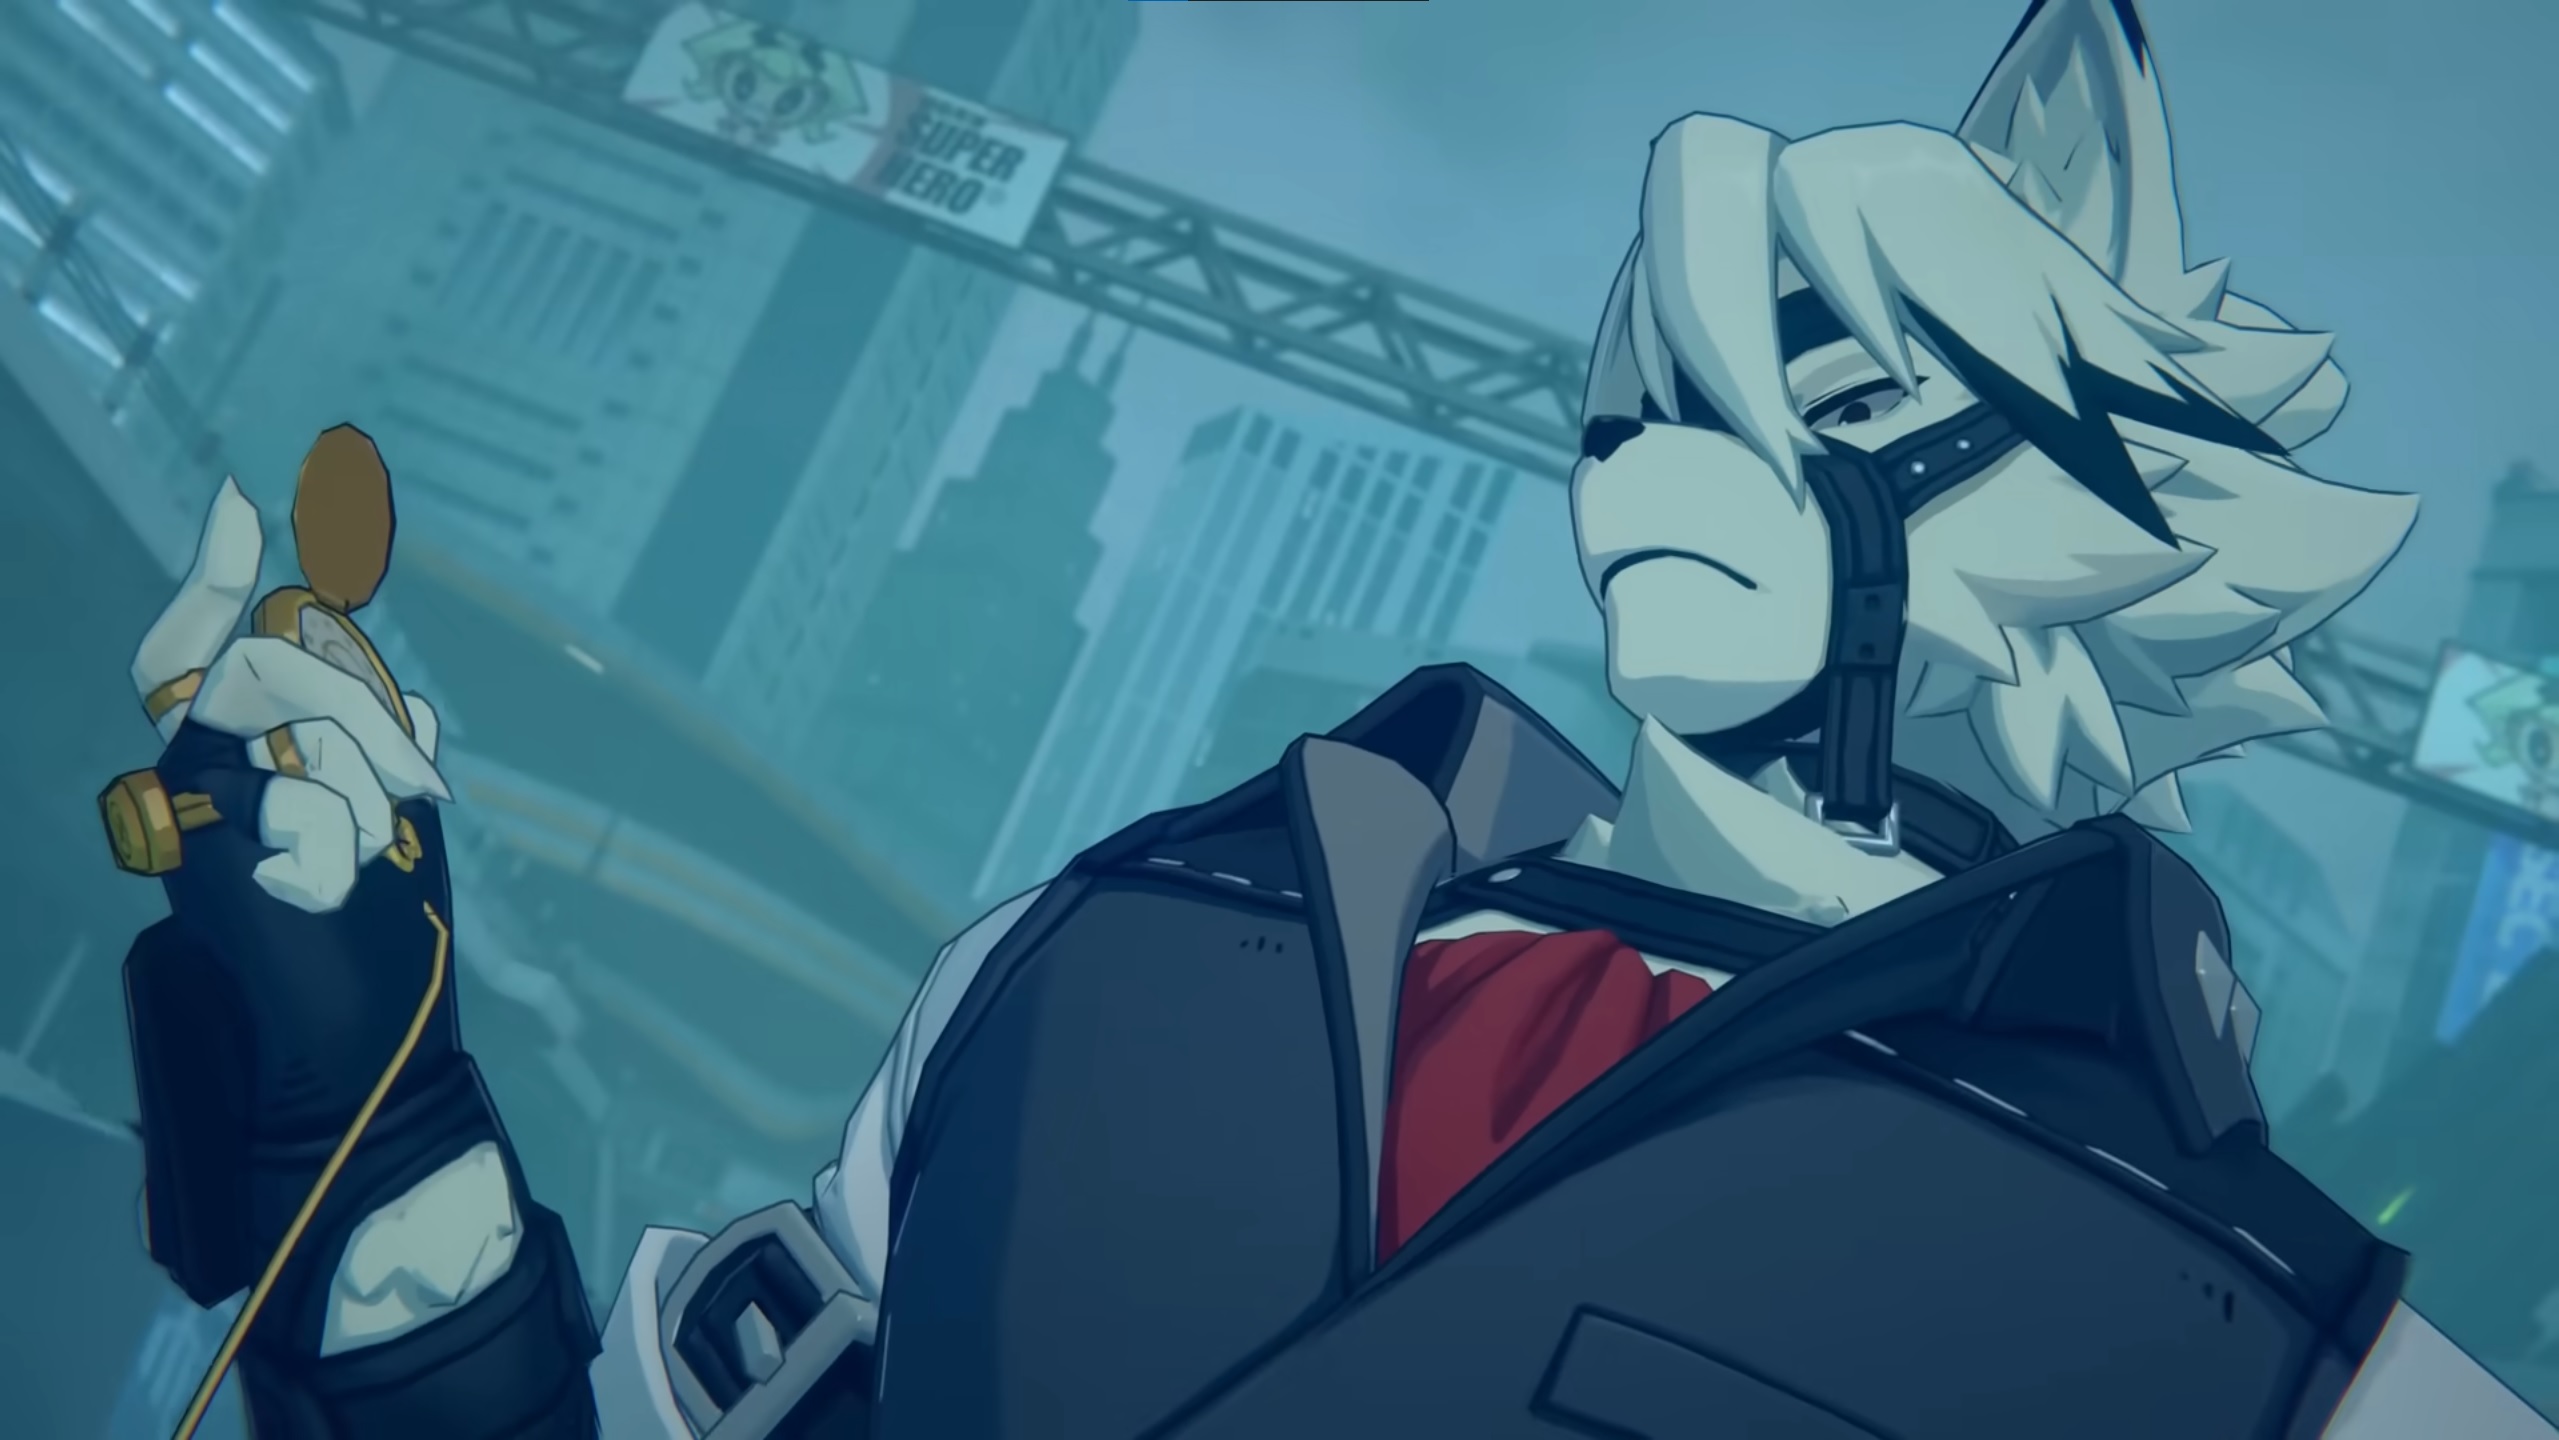 Zenless Zone Zero - A white-haired wolf character wearing a vest, red bow tie and muzzle while holding a gold pocket watch.